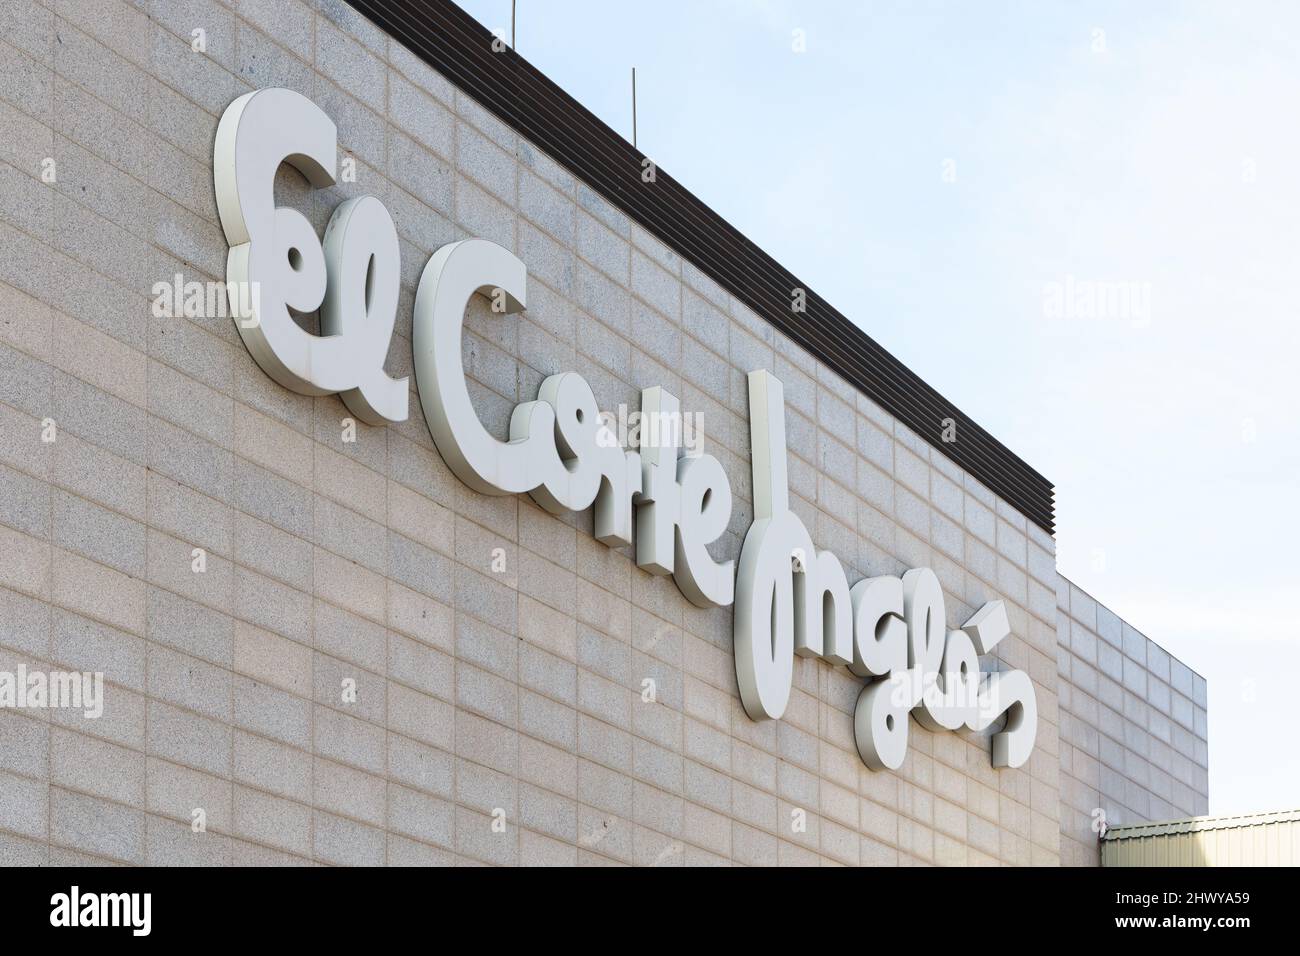 VALENCIA, SPAIN - MARCH 04, 2022: El Corte Ingles is a Spanish department store chain. It is one of the biggest groups in Europe Stock Photo